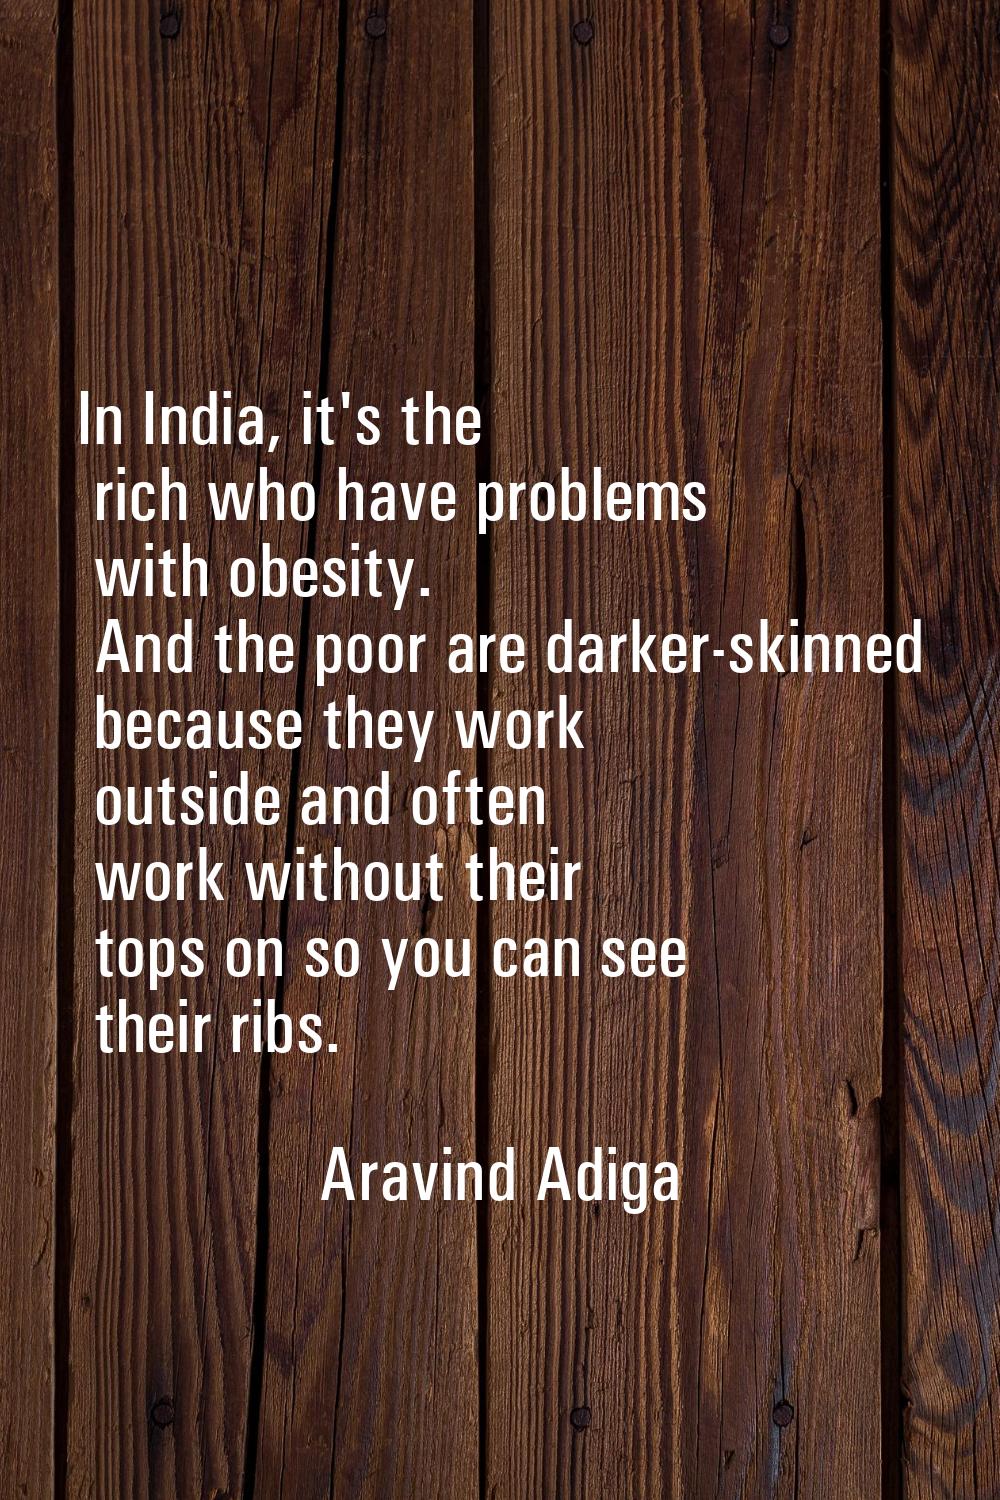 In India, it's the rich who have problems with obesity. And the poor are darker-skinned because the